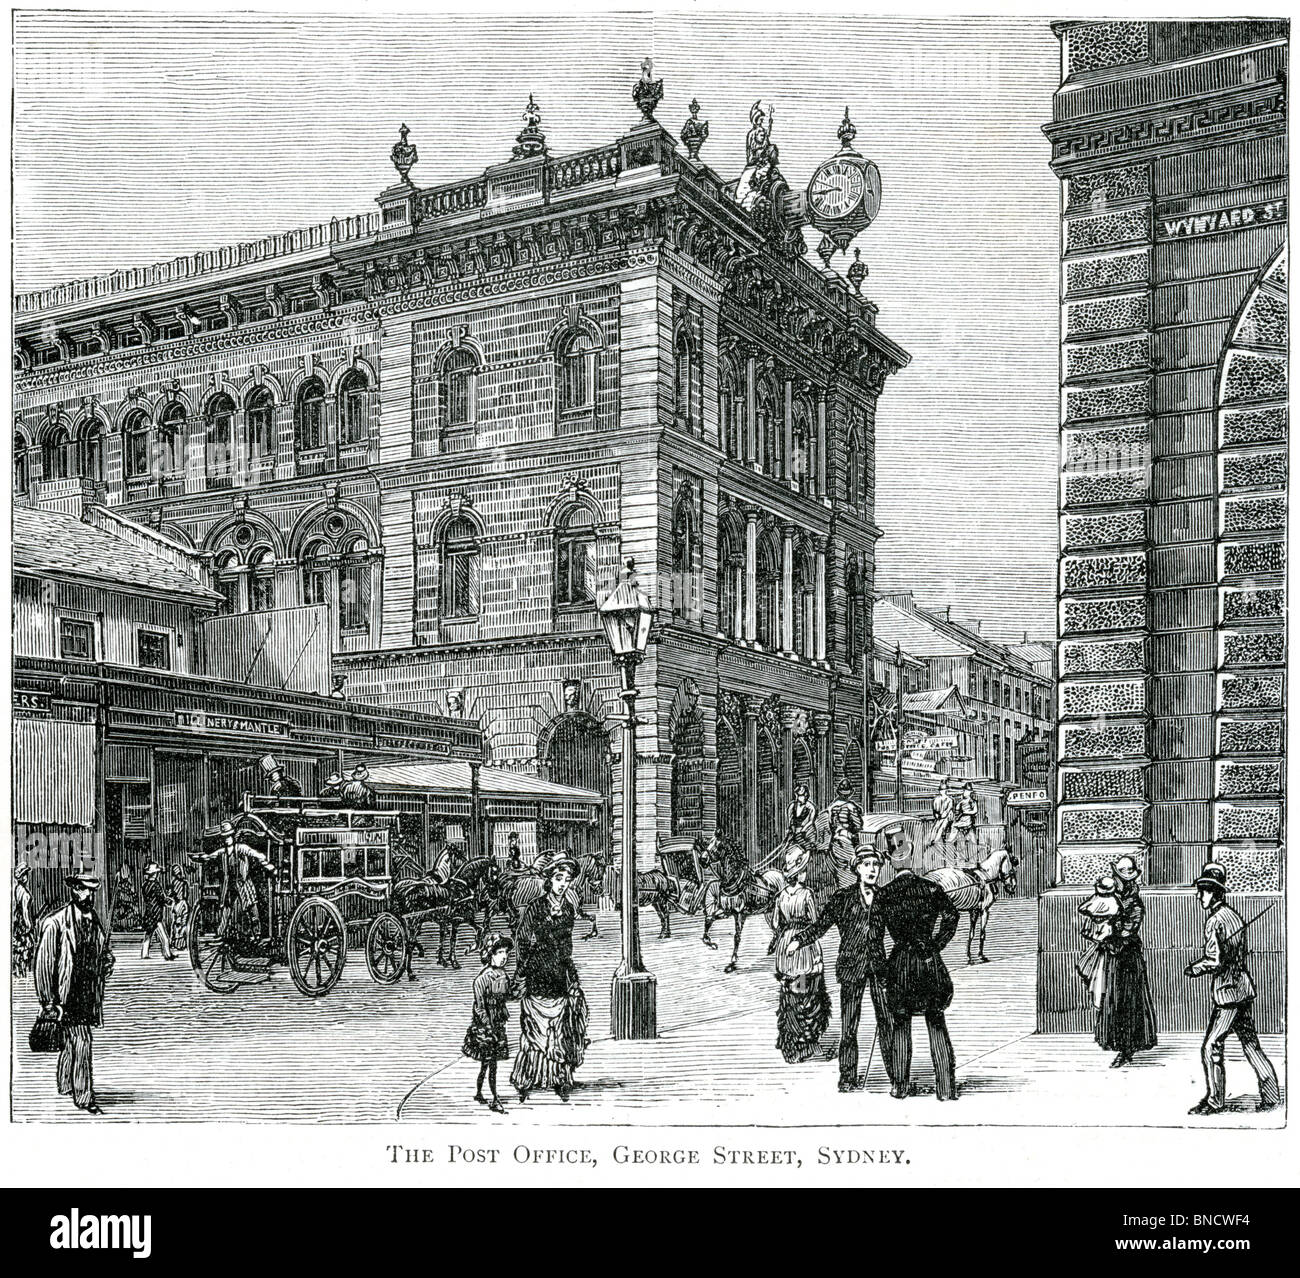 An engraving of the Post Office, George Street, Sydney, New South Wales, Australia - published in a book printed in 1886. Stock Photo